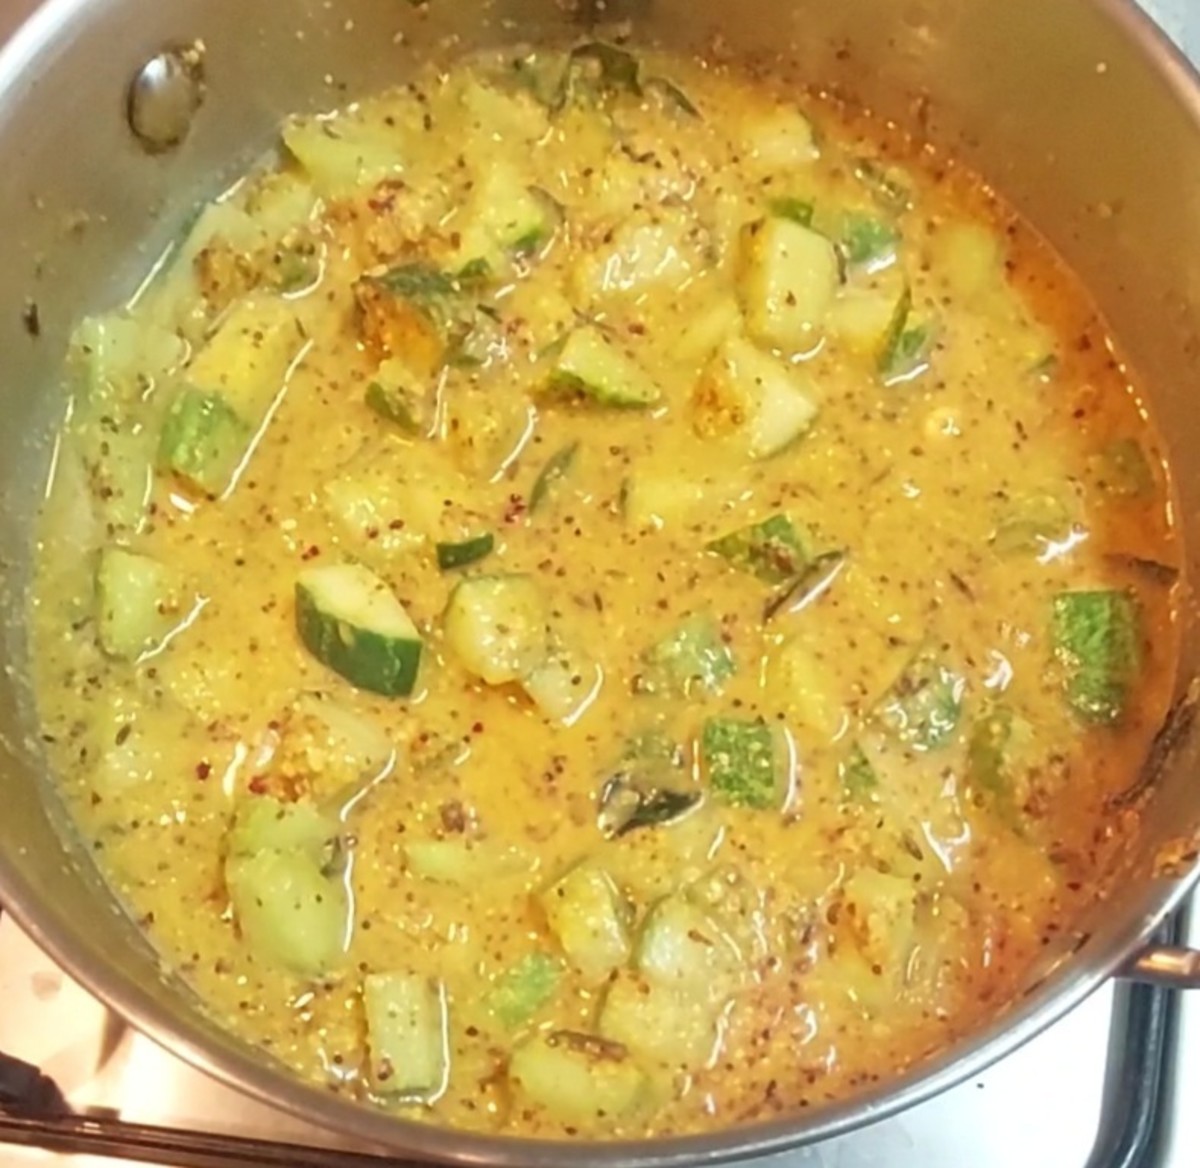 Add 1 cup of water, give a mix, close the lid and cook well till cucumber is cooked. Add more water in between if required.